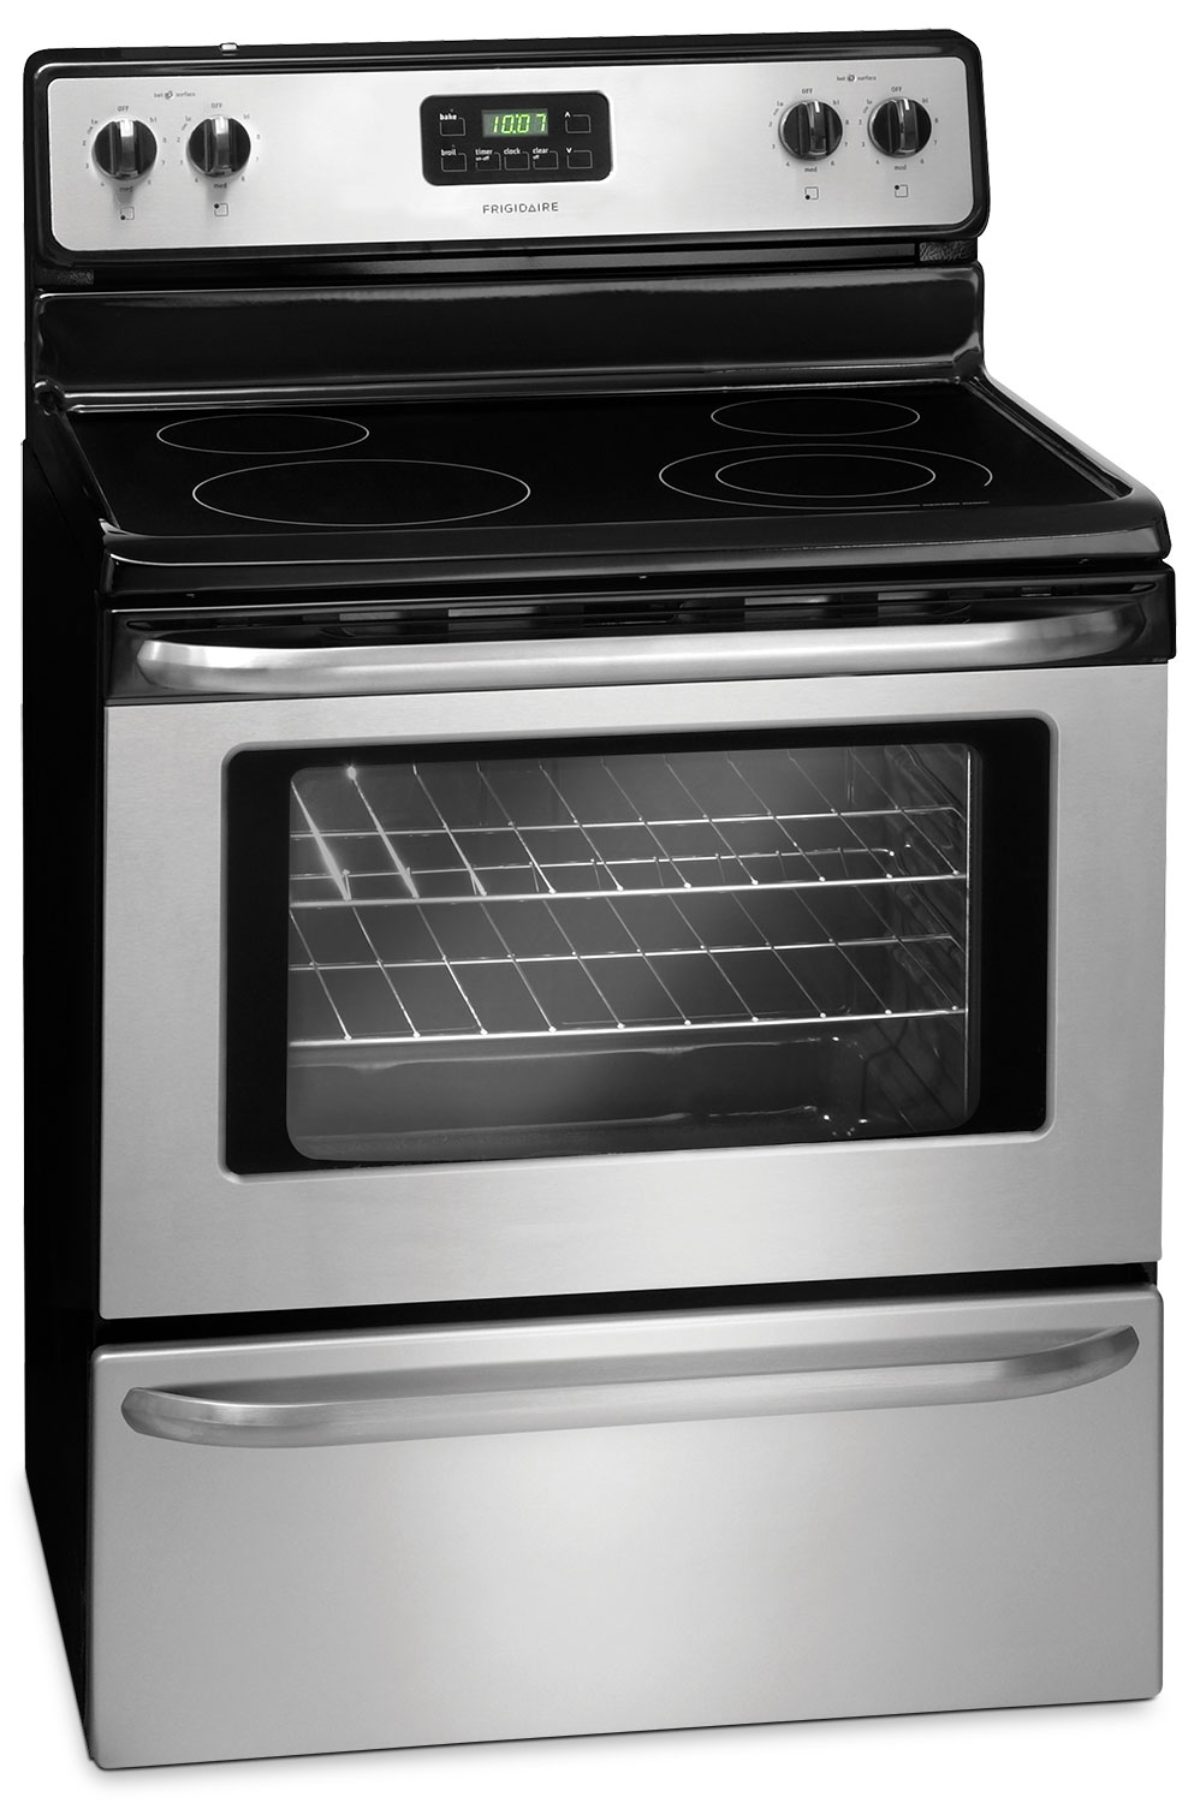 frigidaire-4-8-cu-ft-free-standing-electric-range-stainless-steel